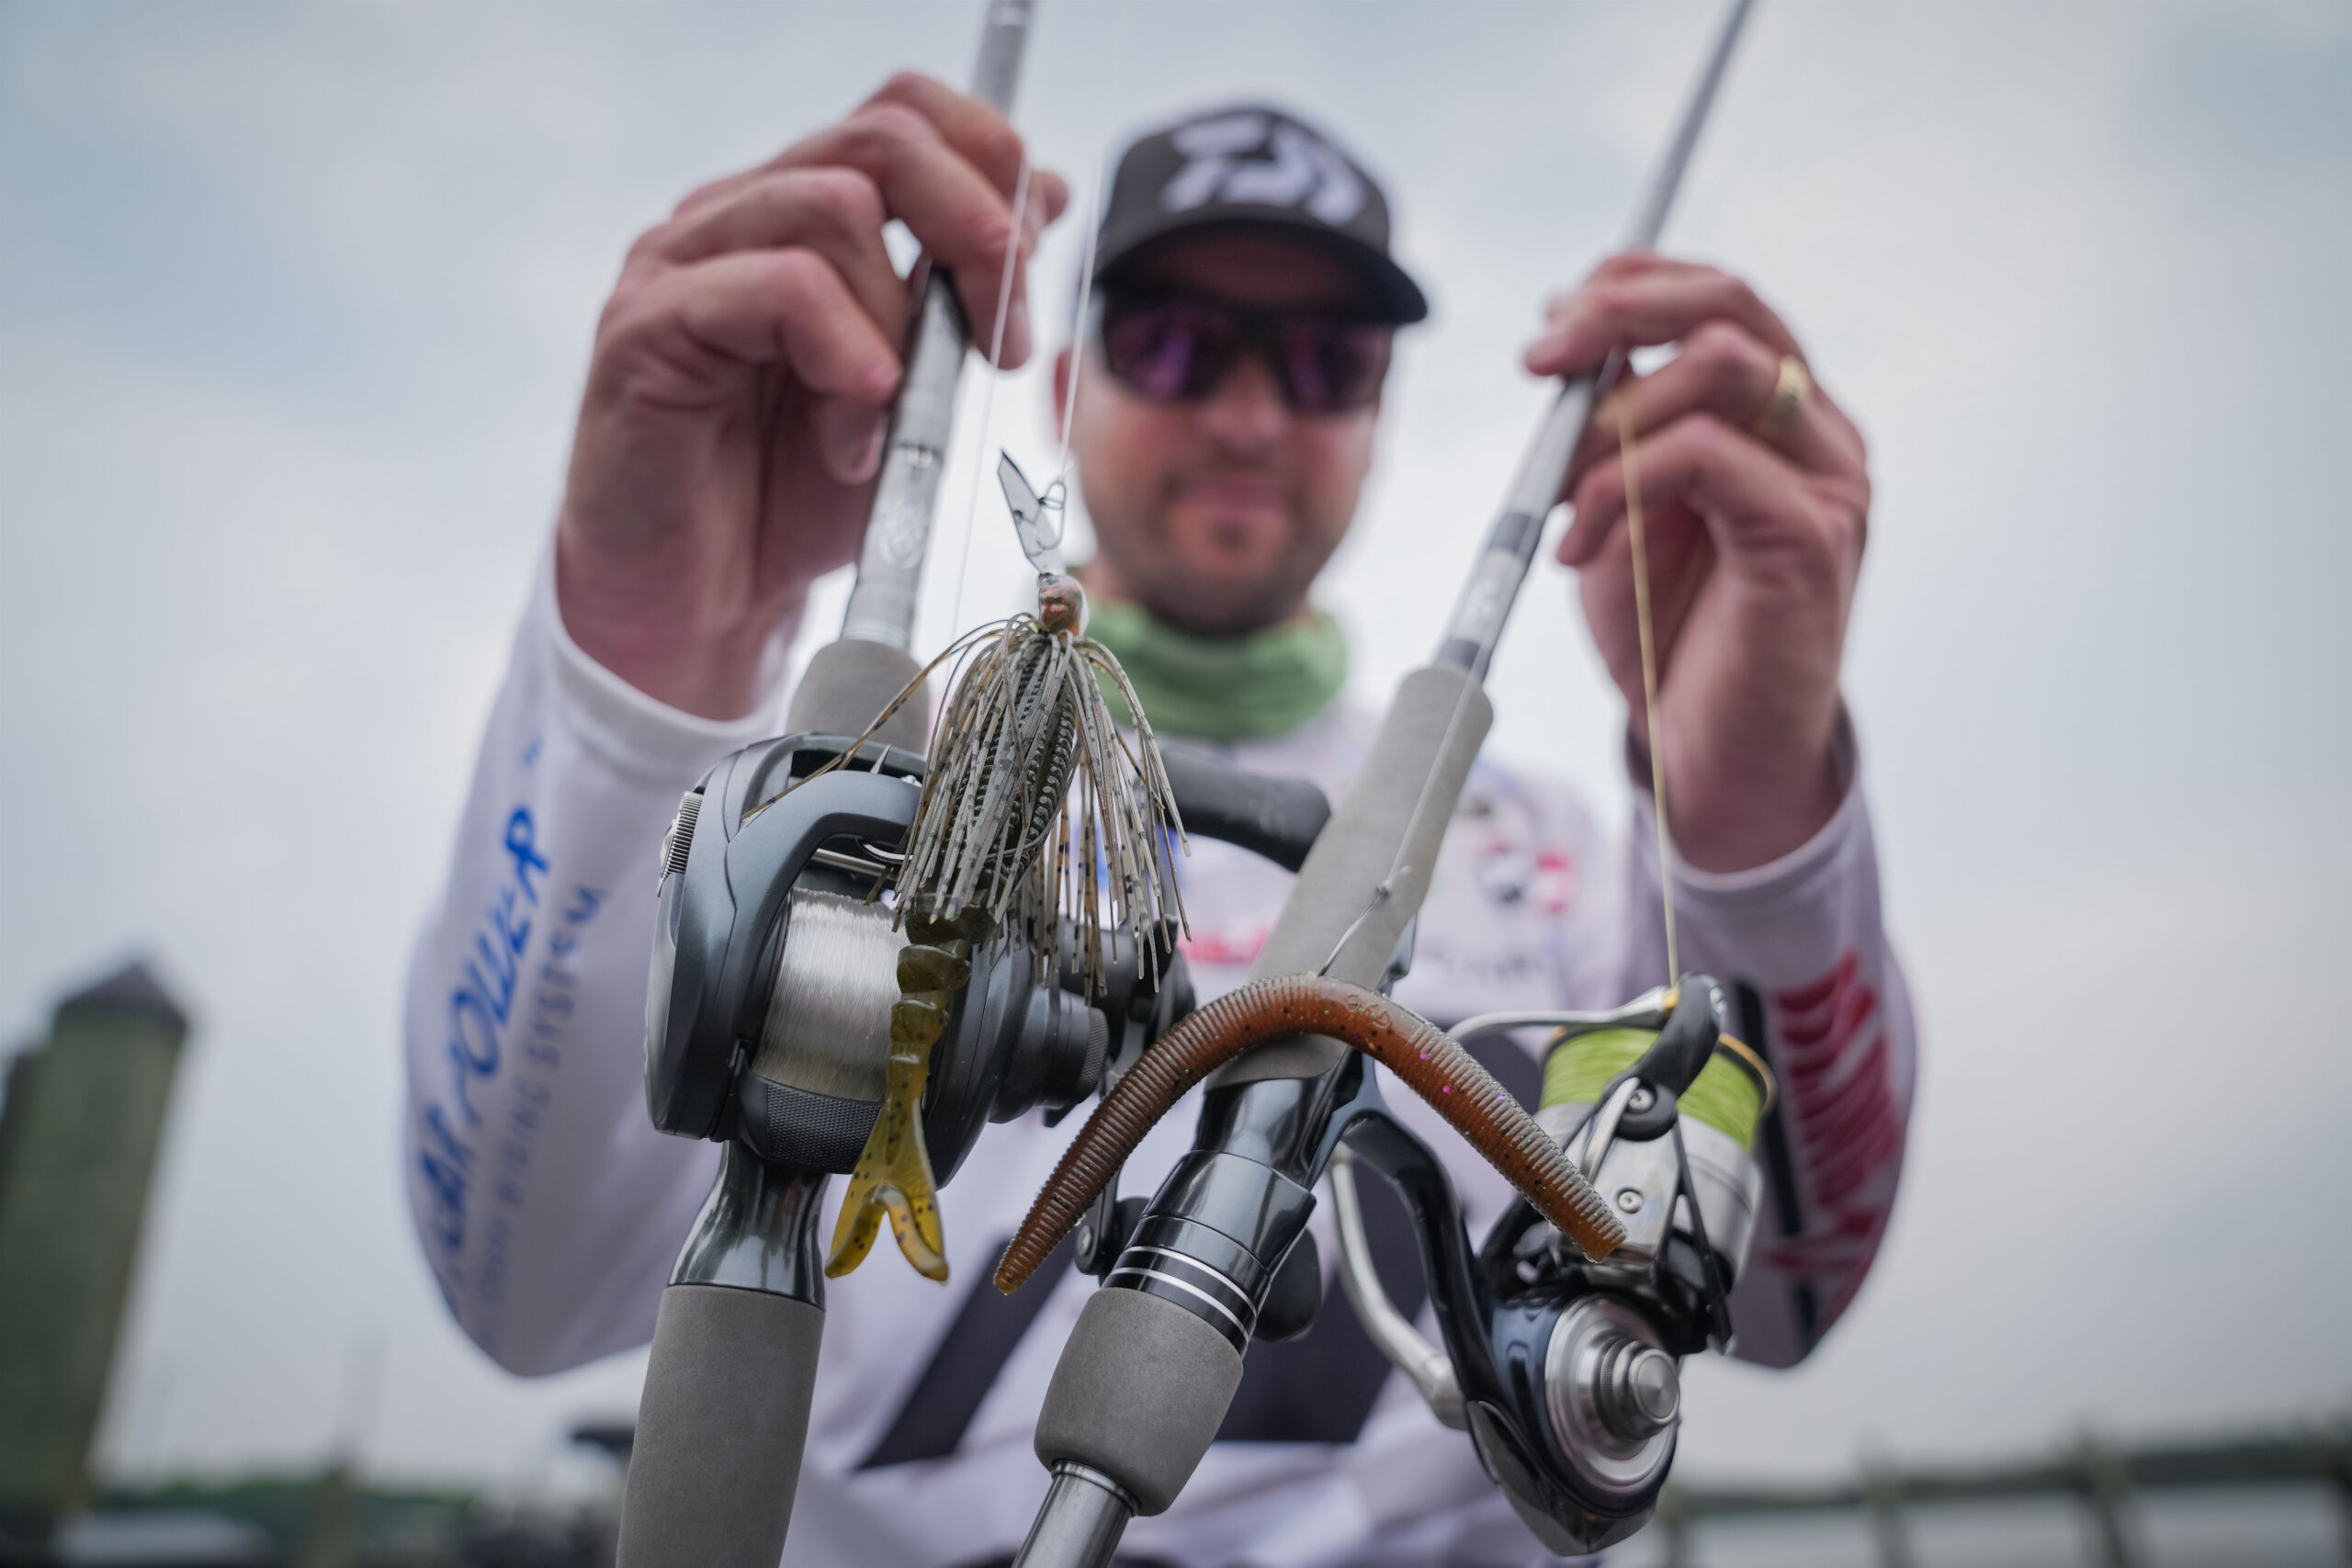 Top 10 baits and patterns from the Potomac River - Major League Fishing